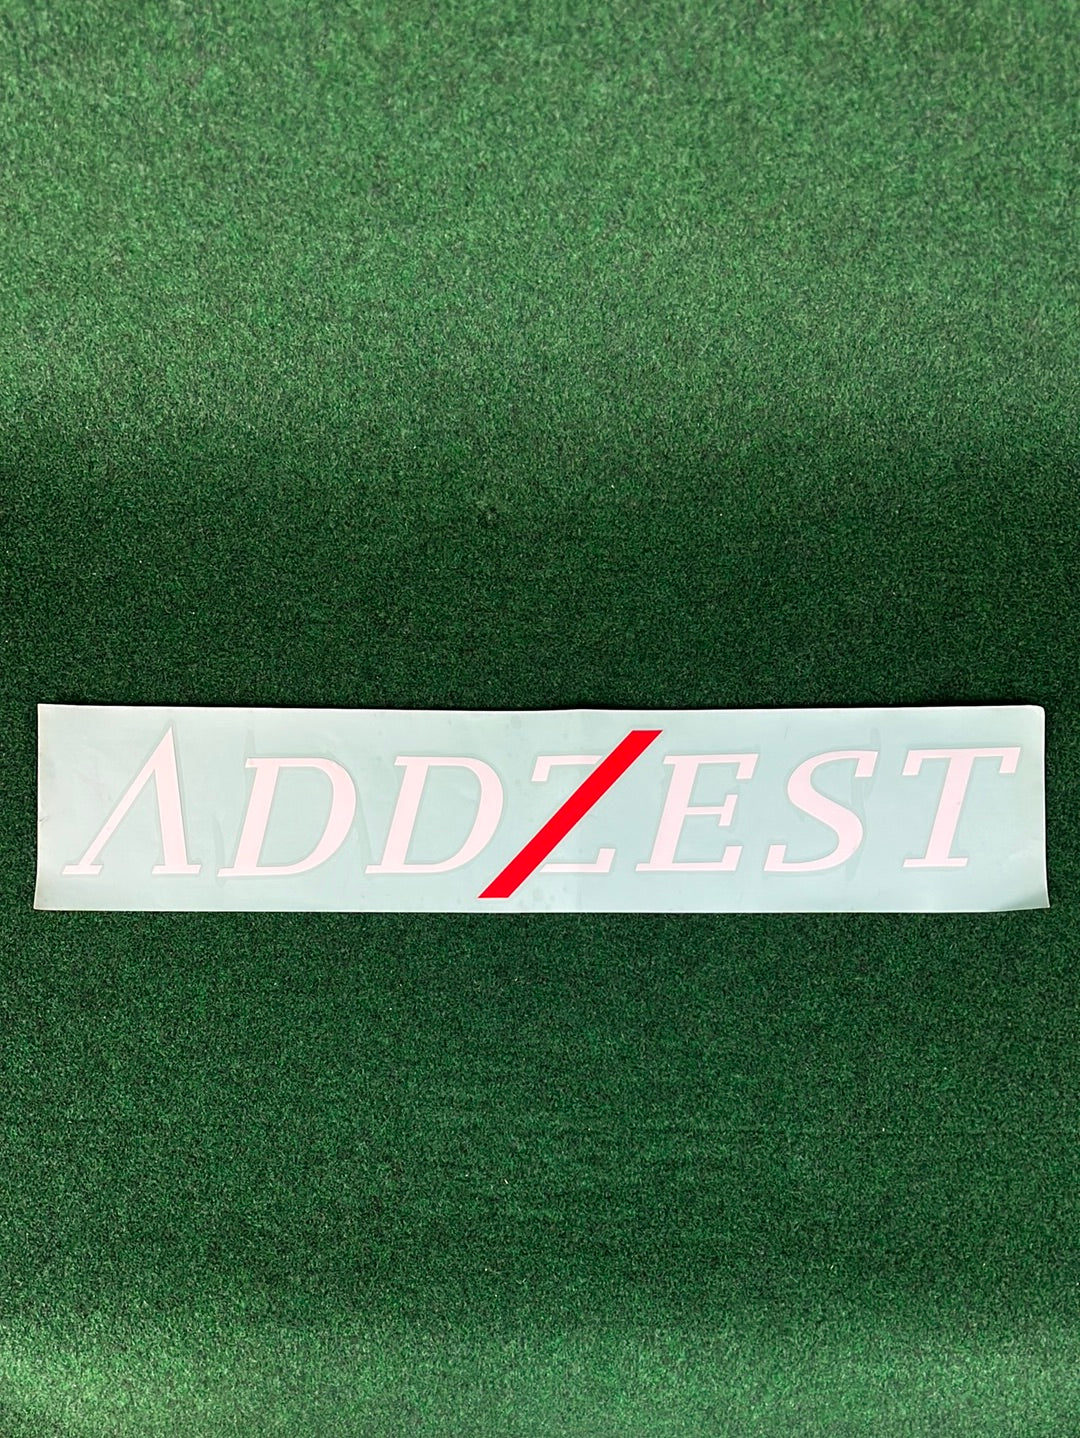 ADDZEST - Large White Letter Logo Decal